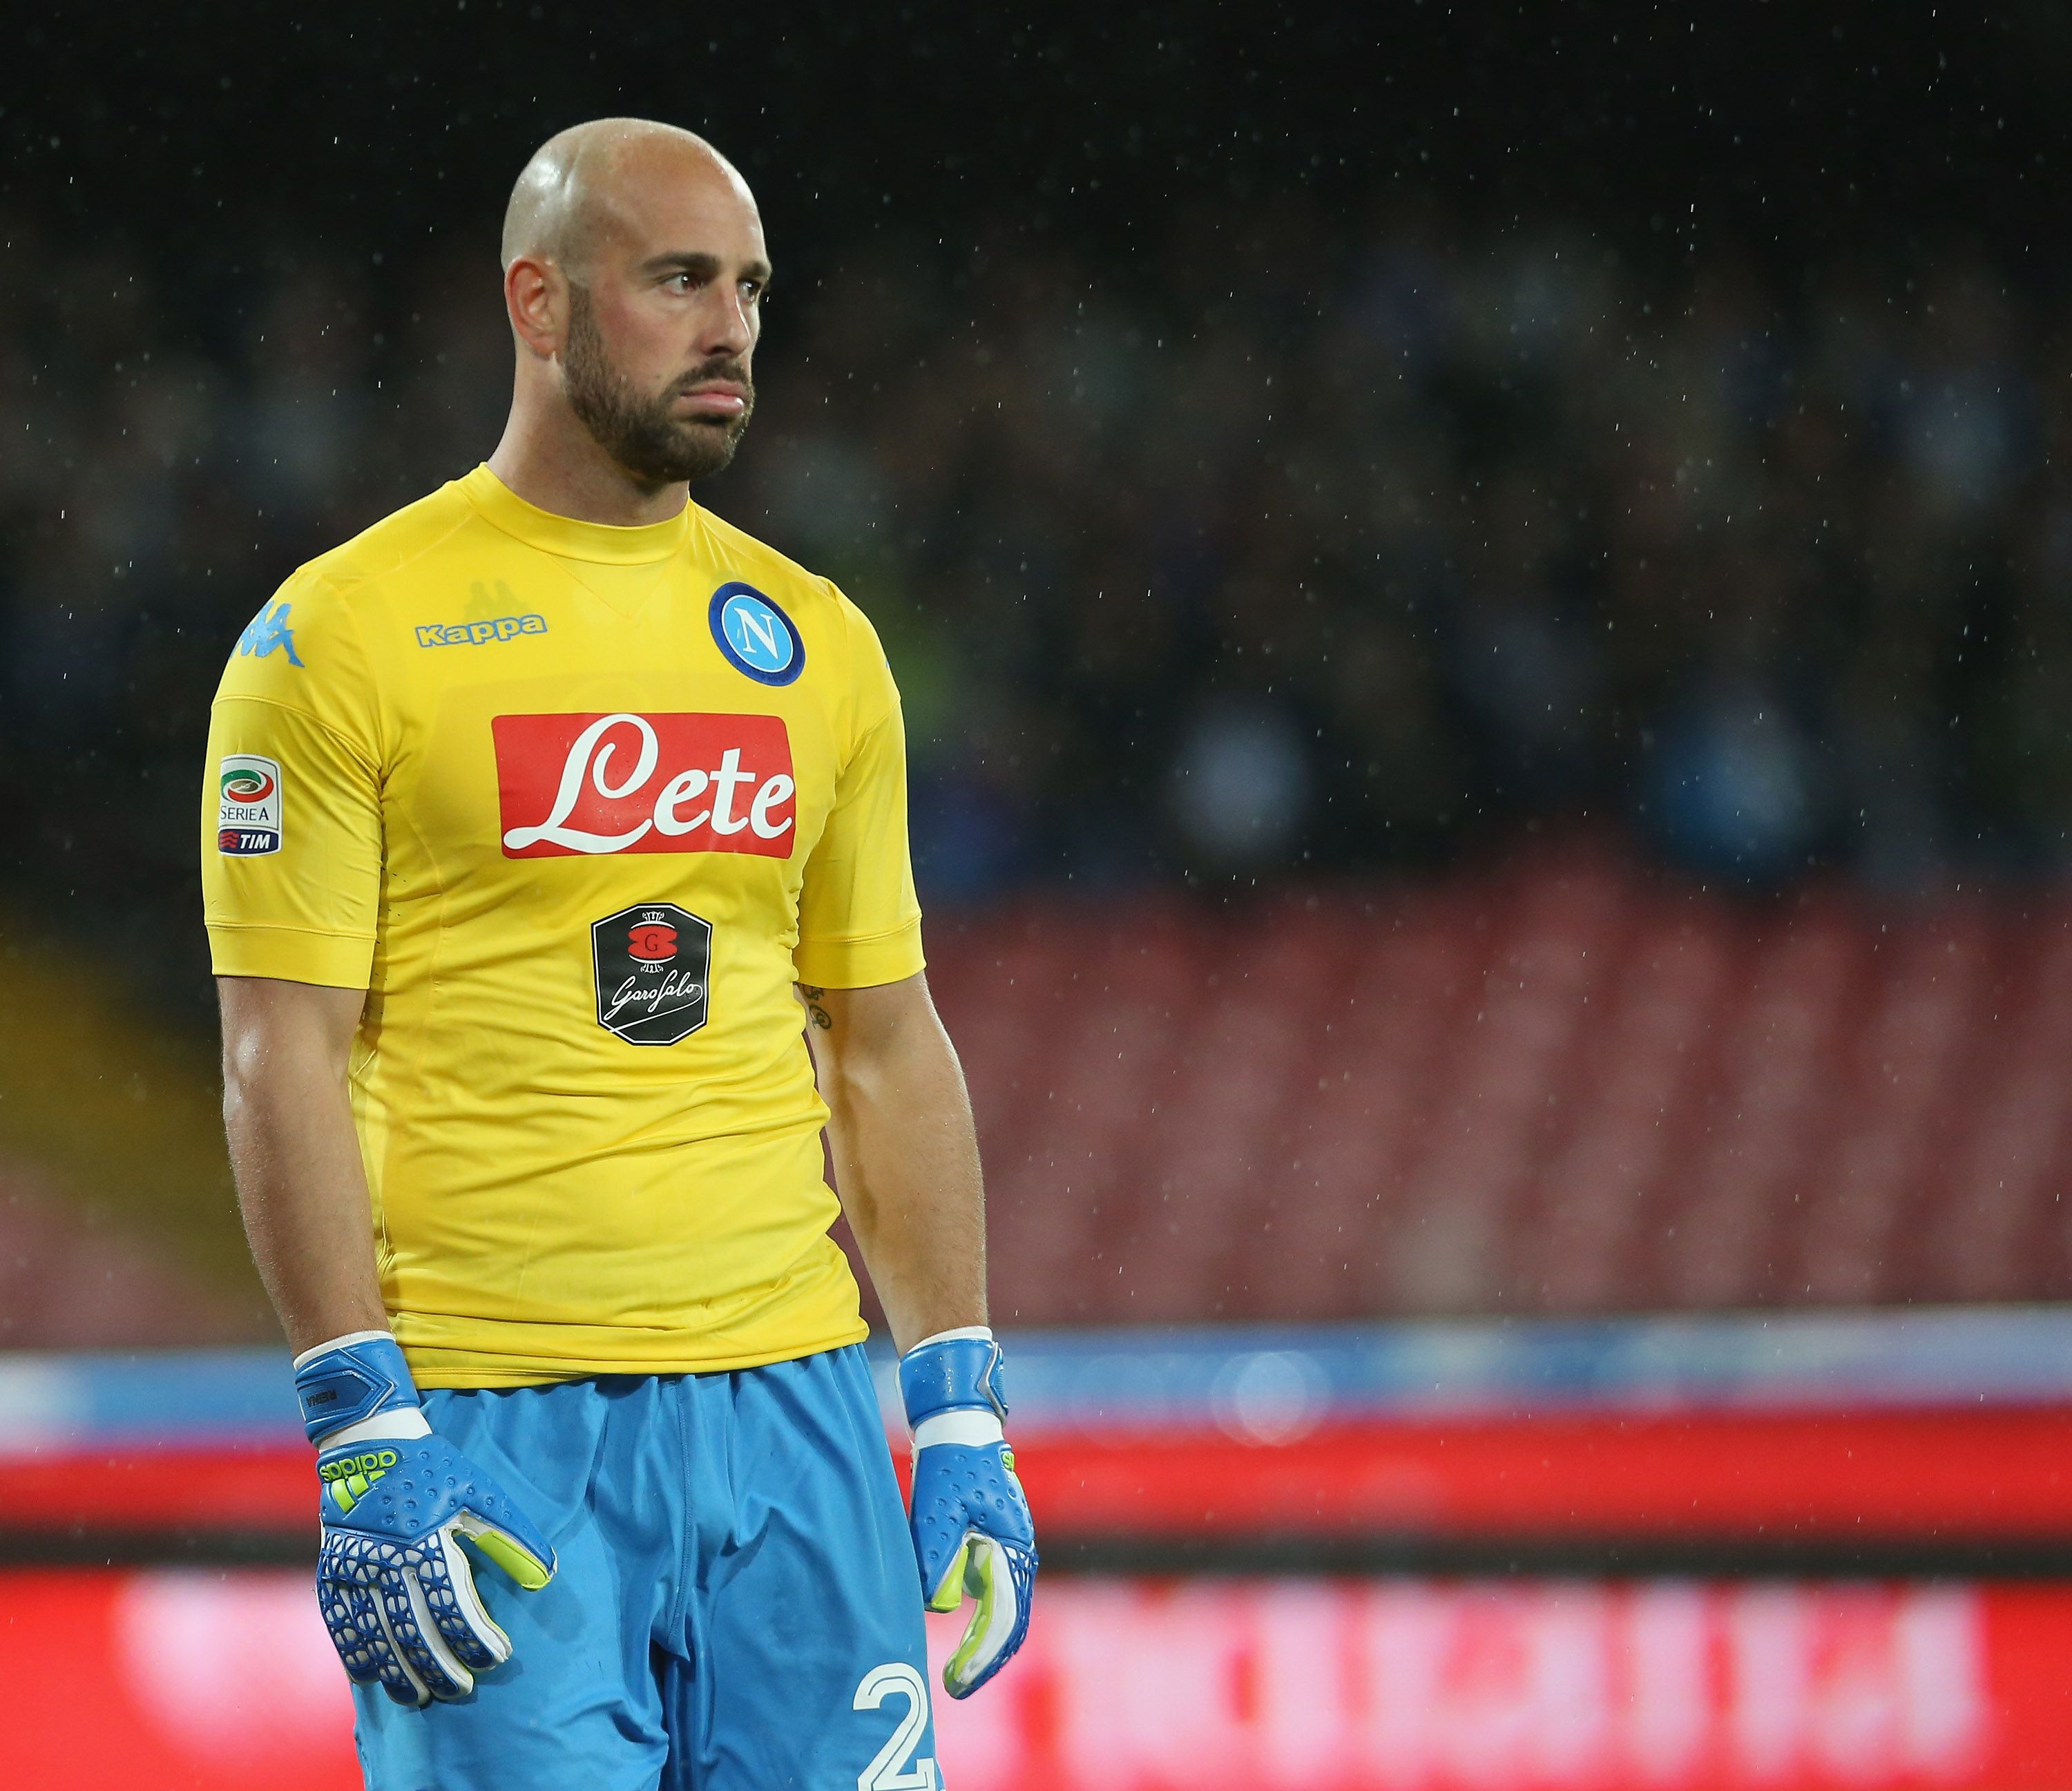 Pepe Reina in action for Napoli. (Getty Images)